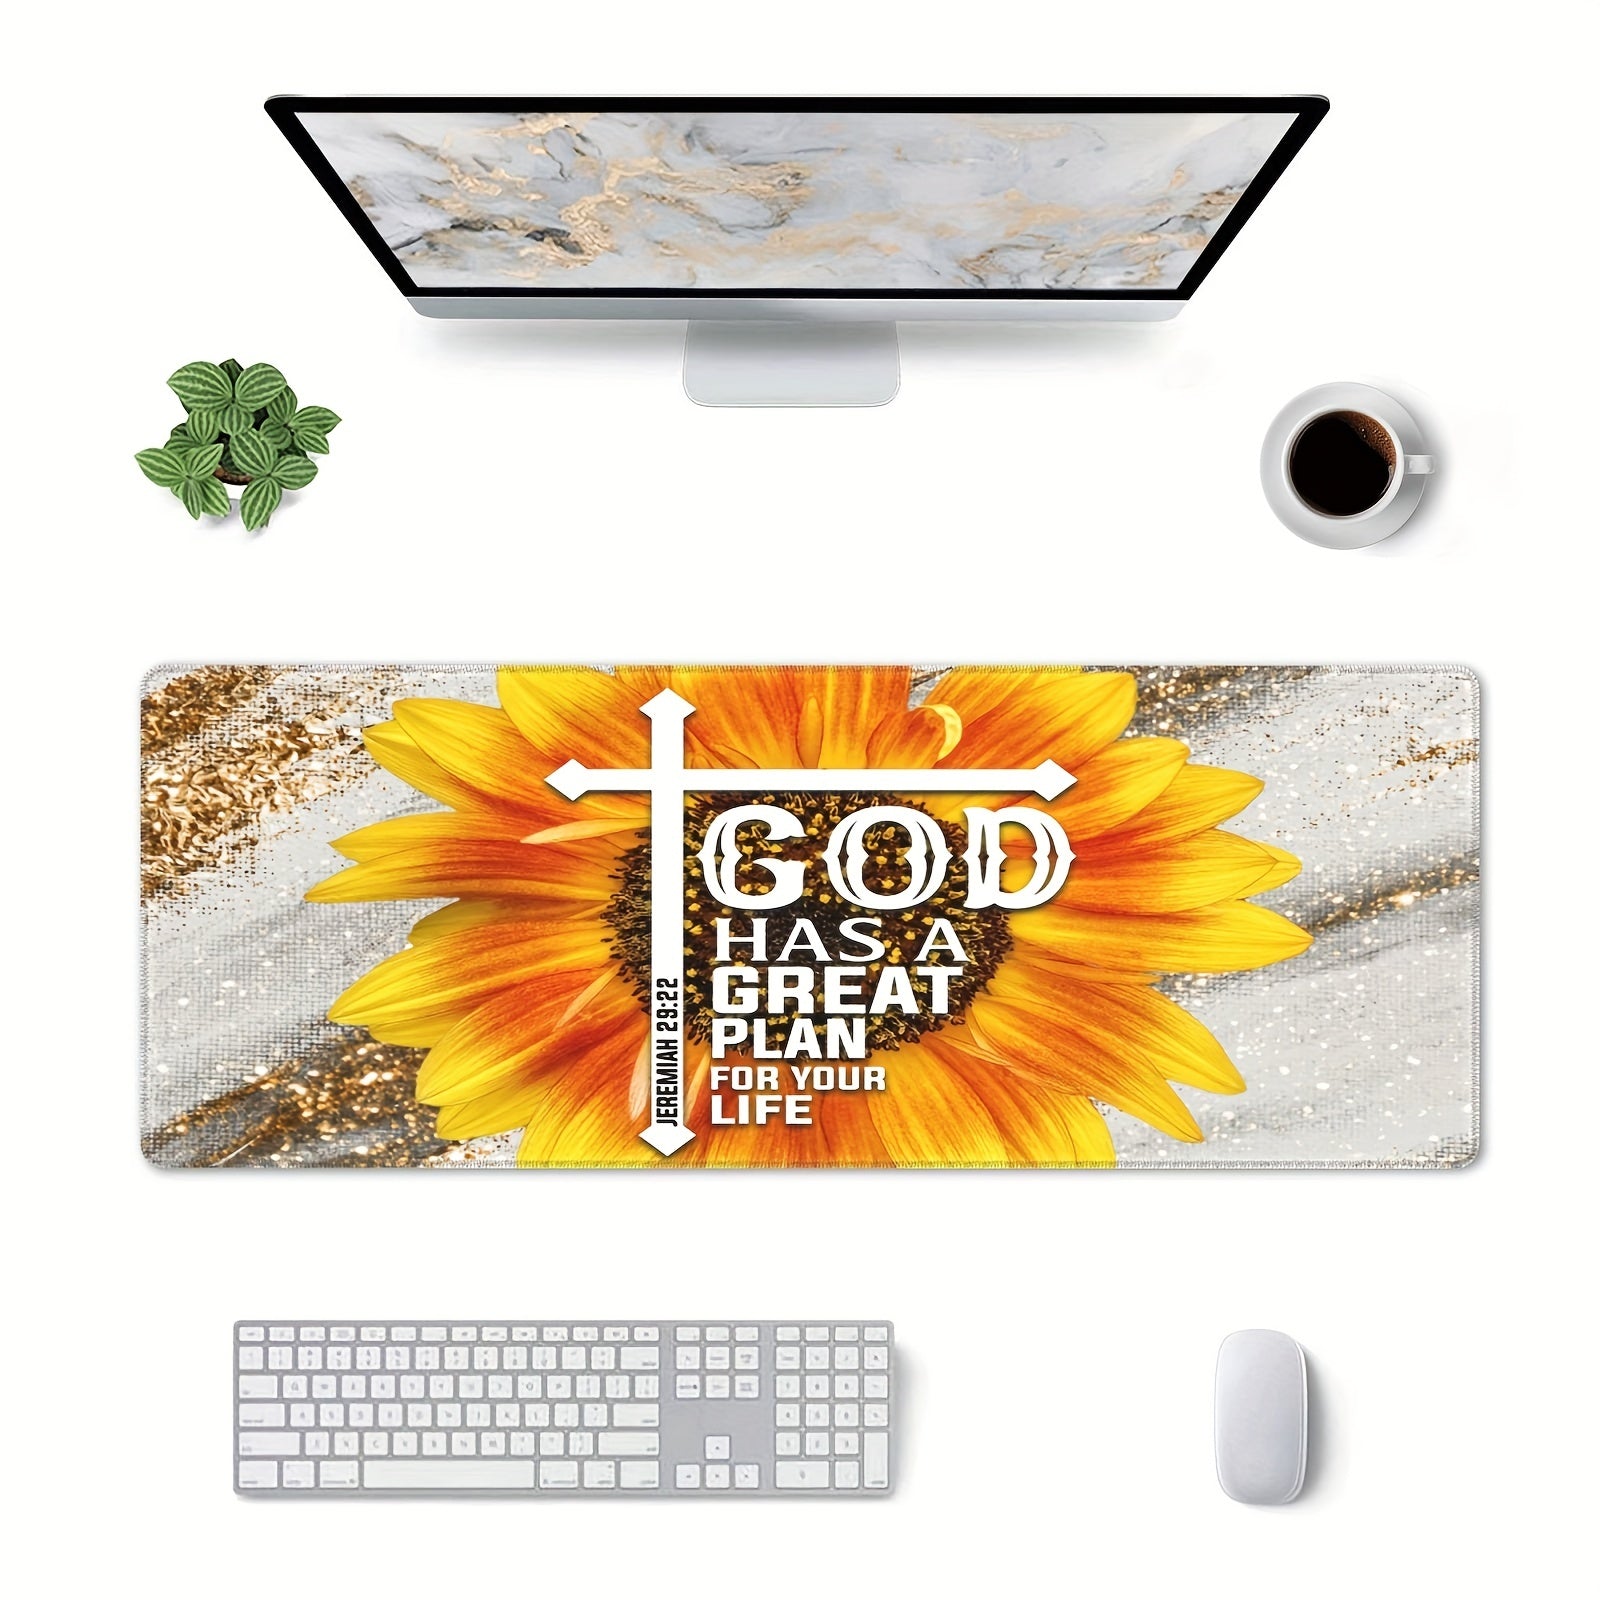 God Has A Great Plan For Your Life Christian Computer Keyboard Mouse Pad 11.8x31.5in claimedbygoddesigns